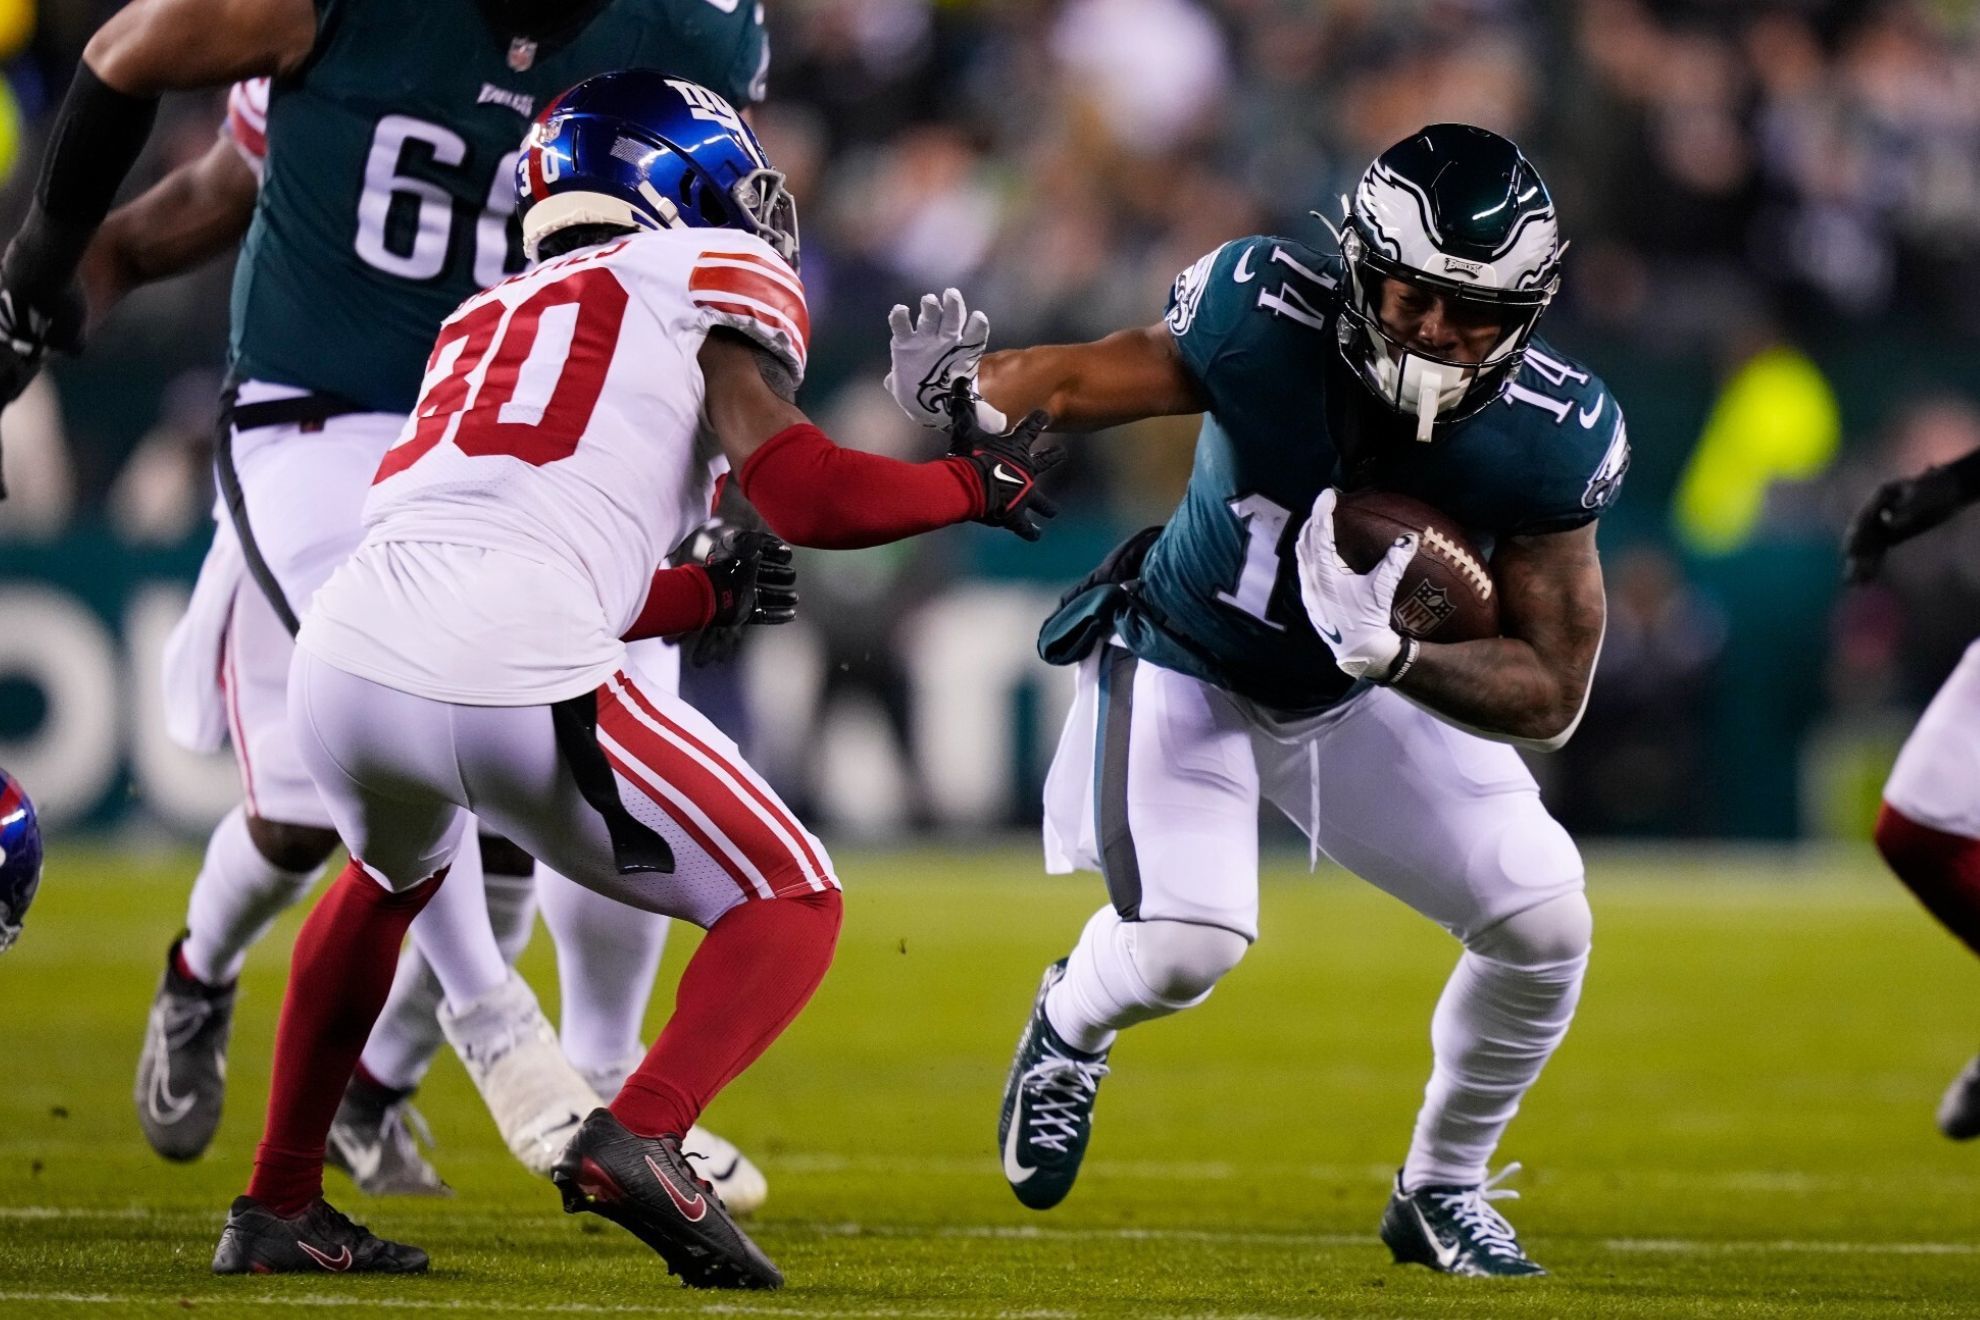 Giants - Eagles: Final score, full highlights and play-by-play